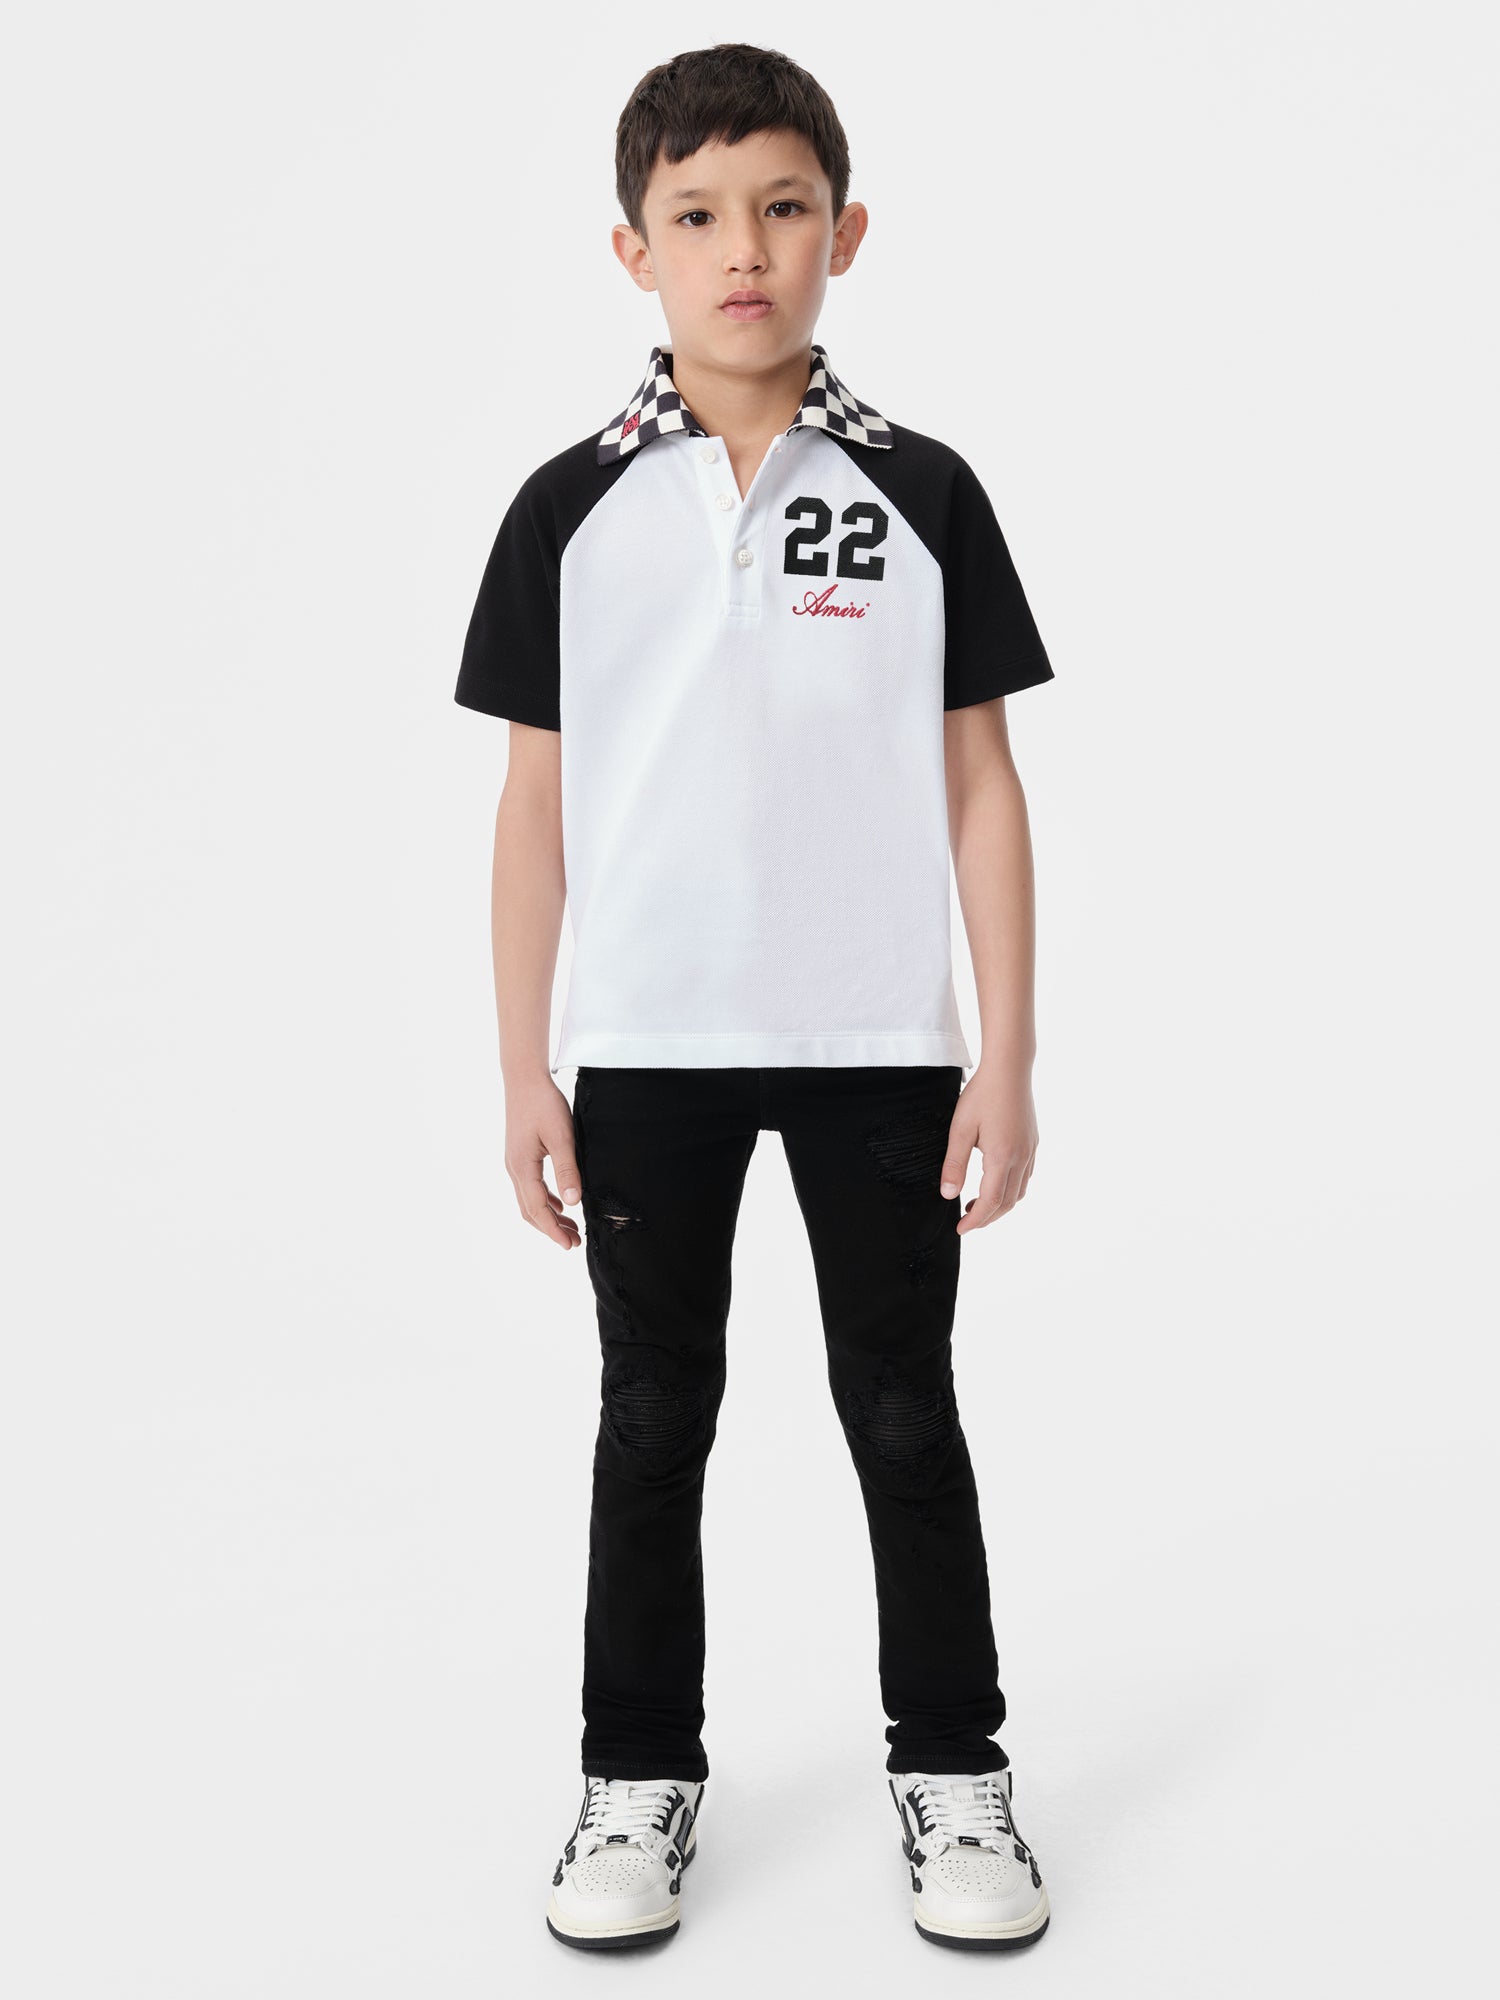 Product KIDS - MA CHECKERED 22 POLO - White Black featured image